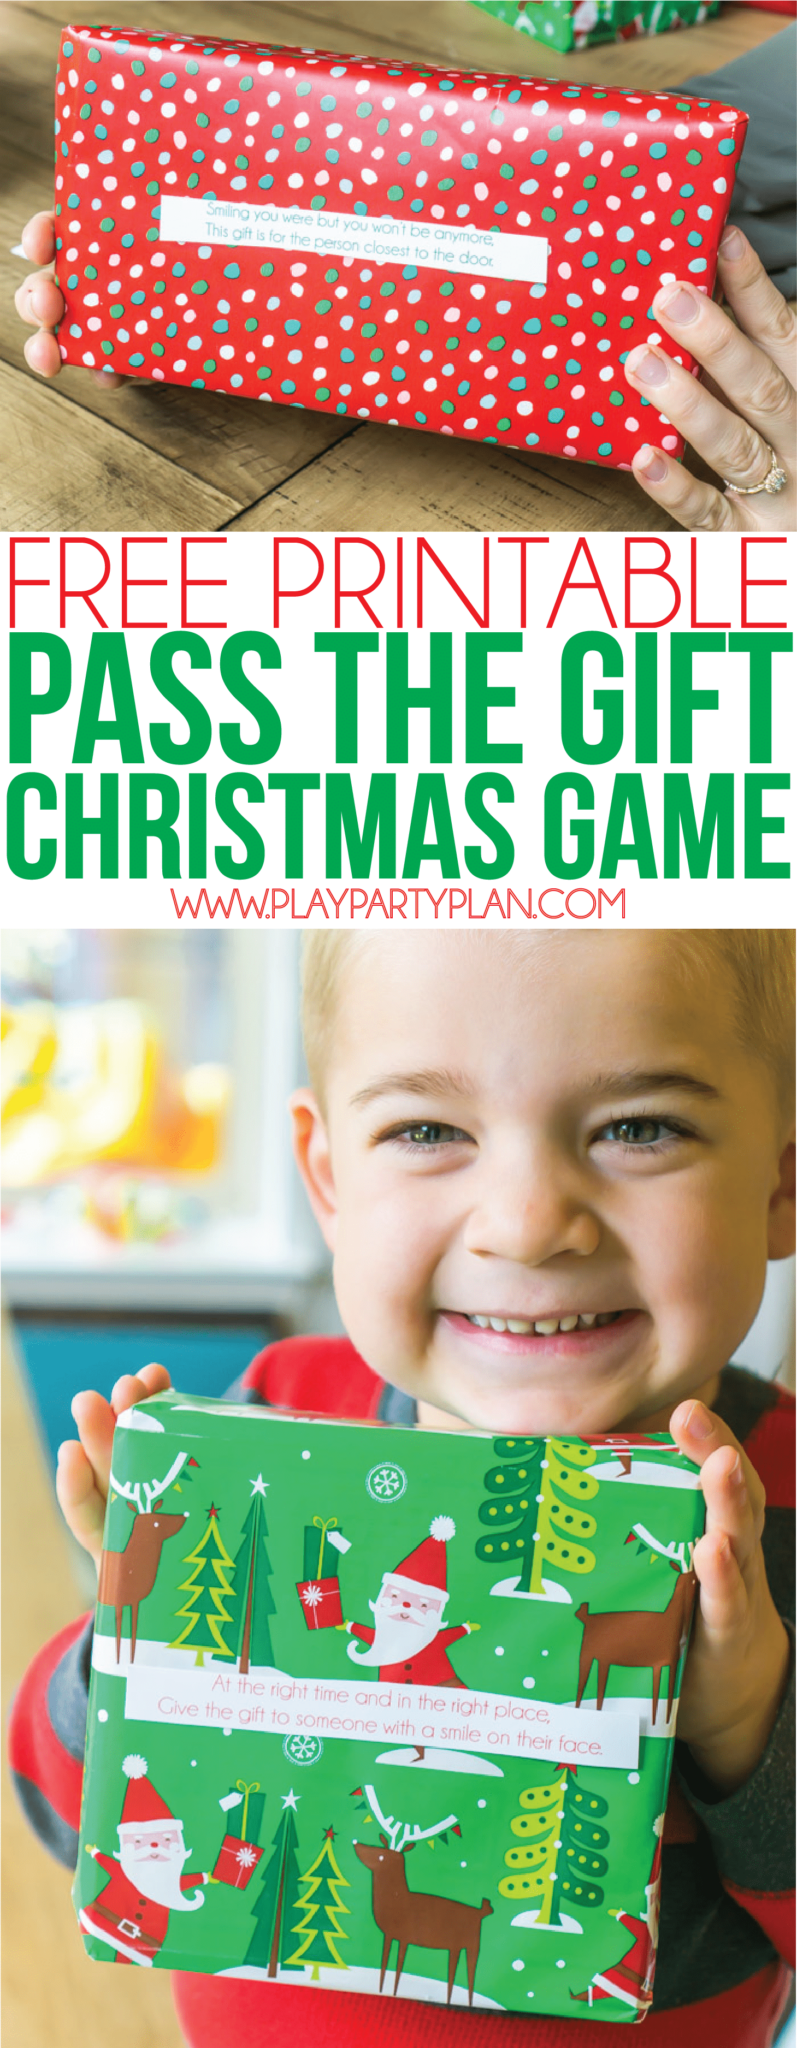 a-gift-exchange-game-your-guests-will-be-lucky-to-play